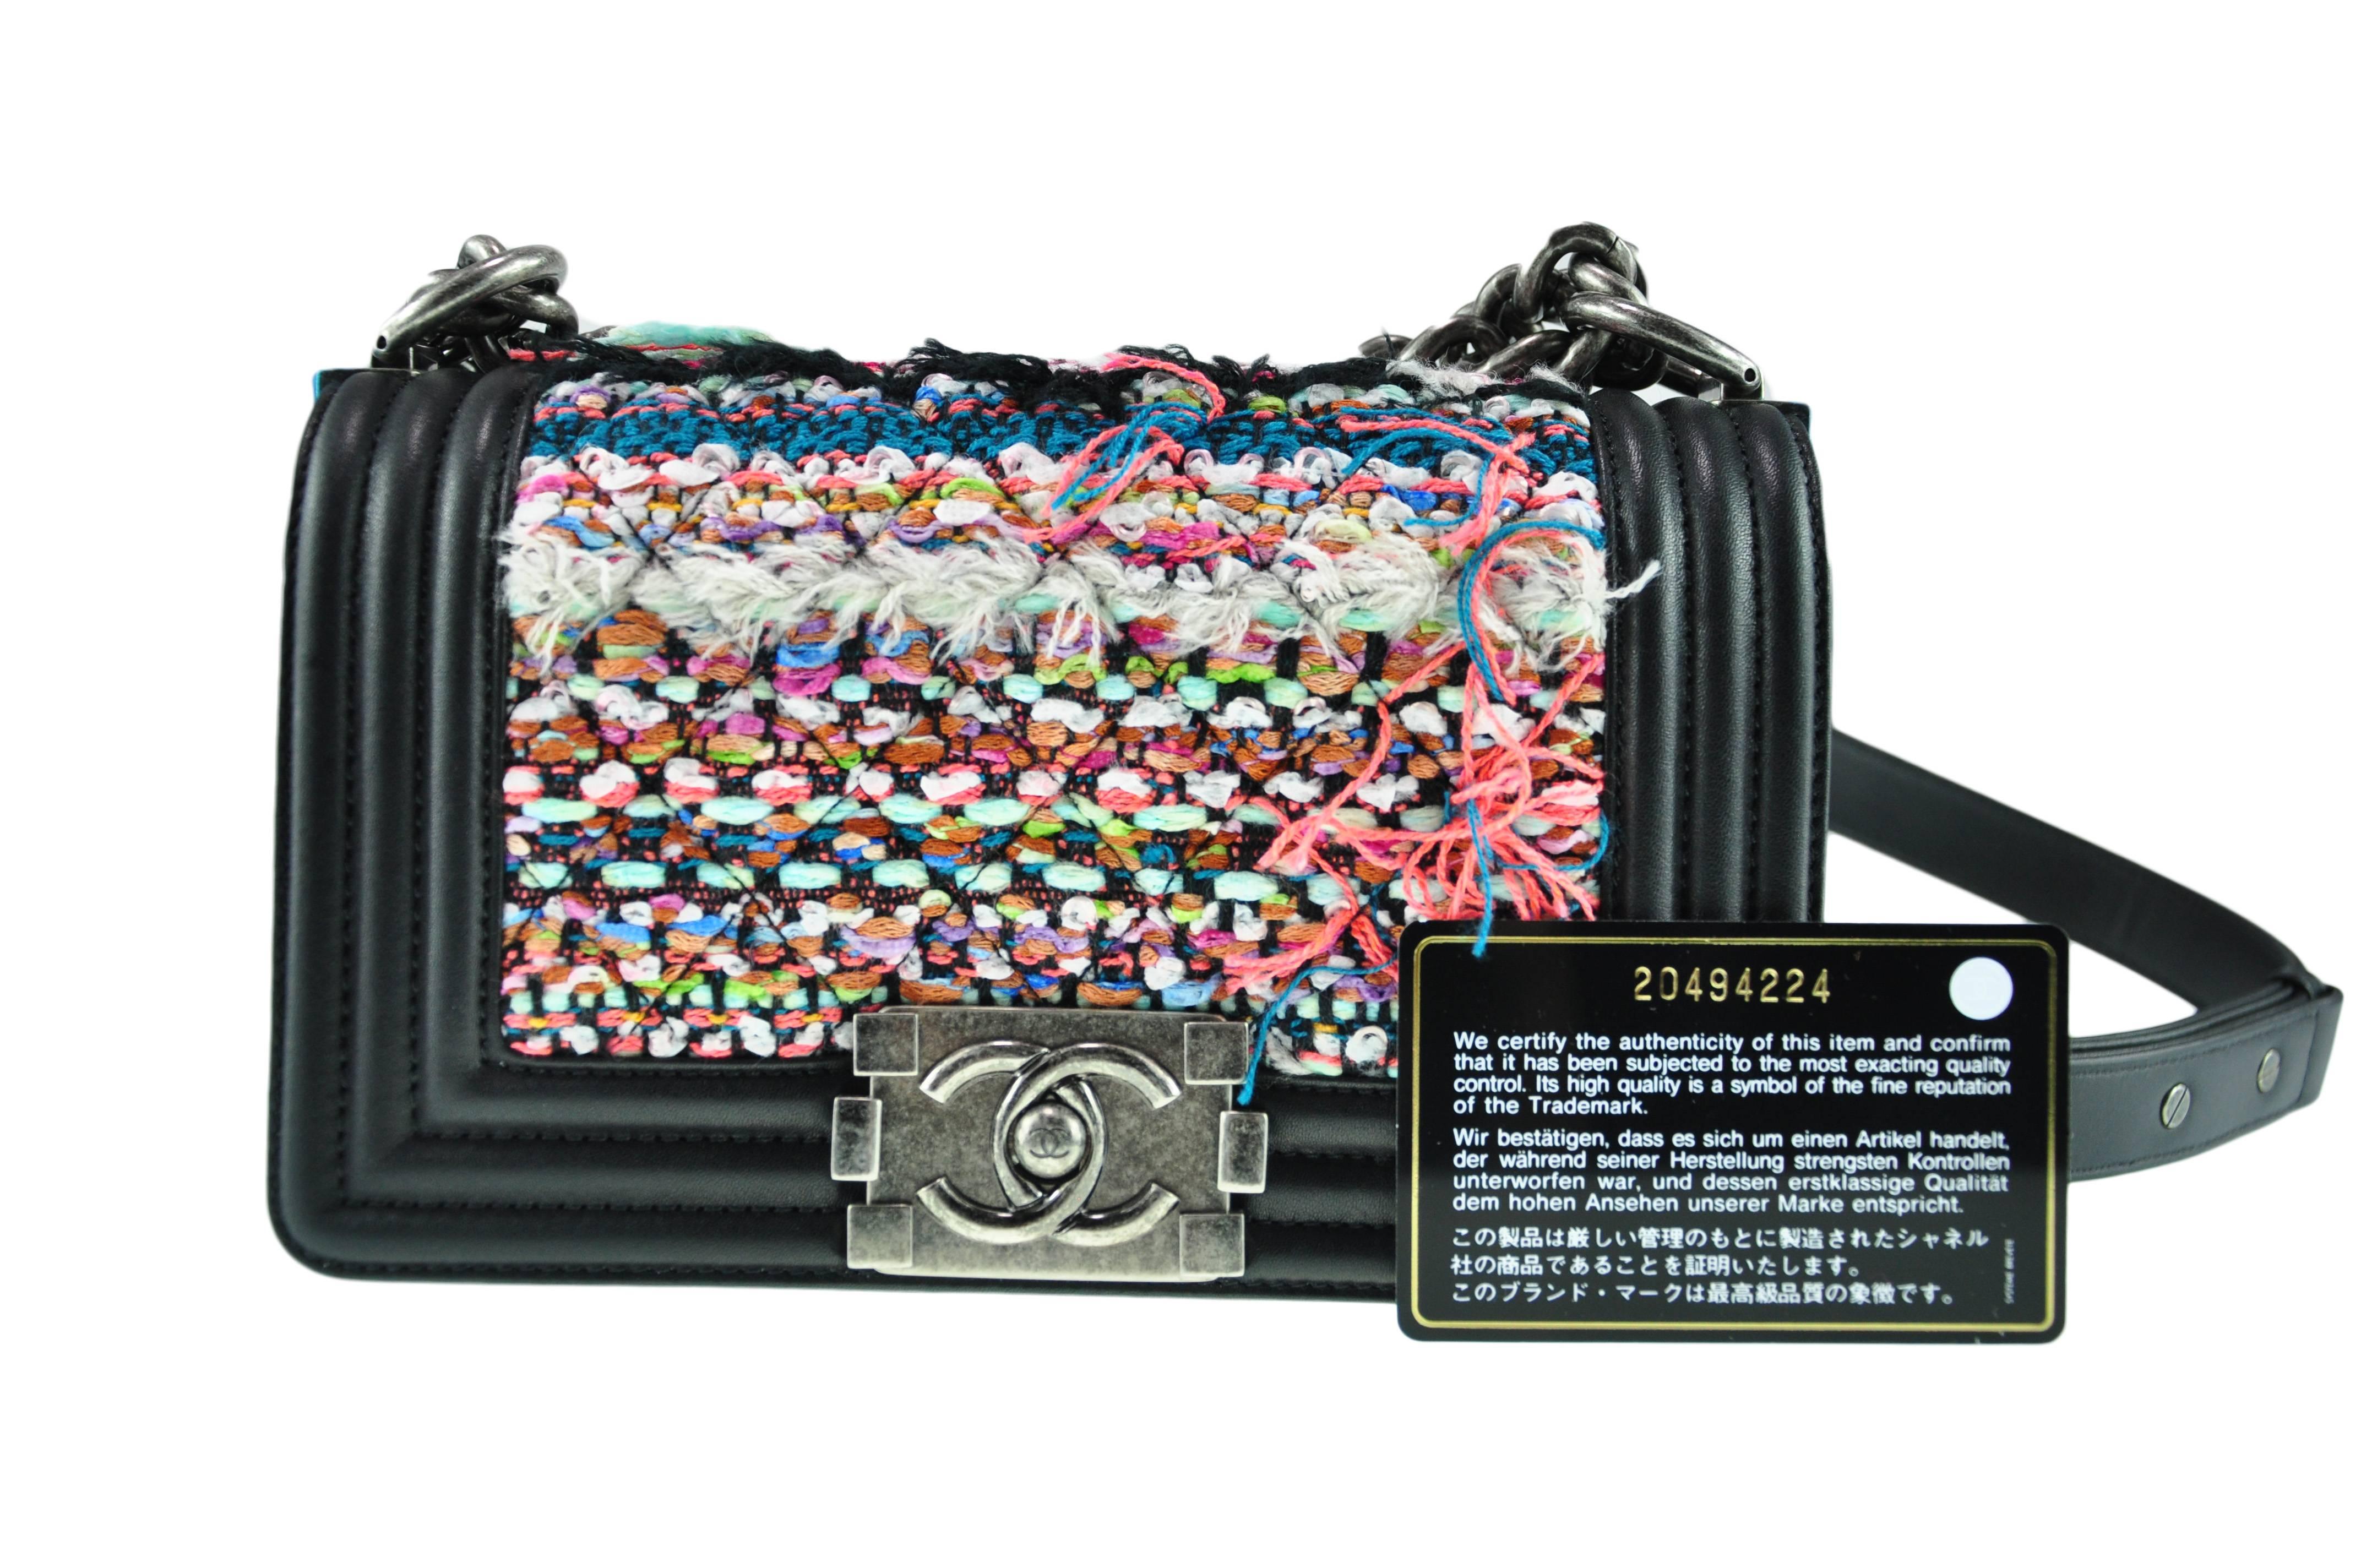 A special edition of Chanel Boy in small size with multi-color tweed.  Pewter chain shoulder strap with leather frame. One interior open pocket. It comes with authenticity card, dust bag and gift box.
Measurement: 8